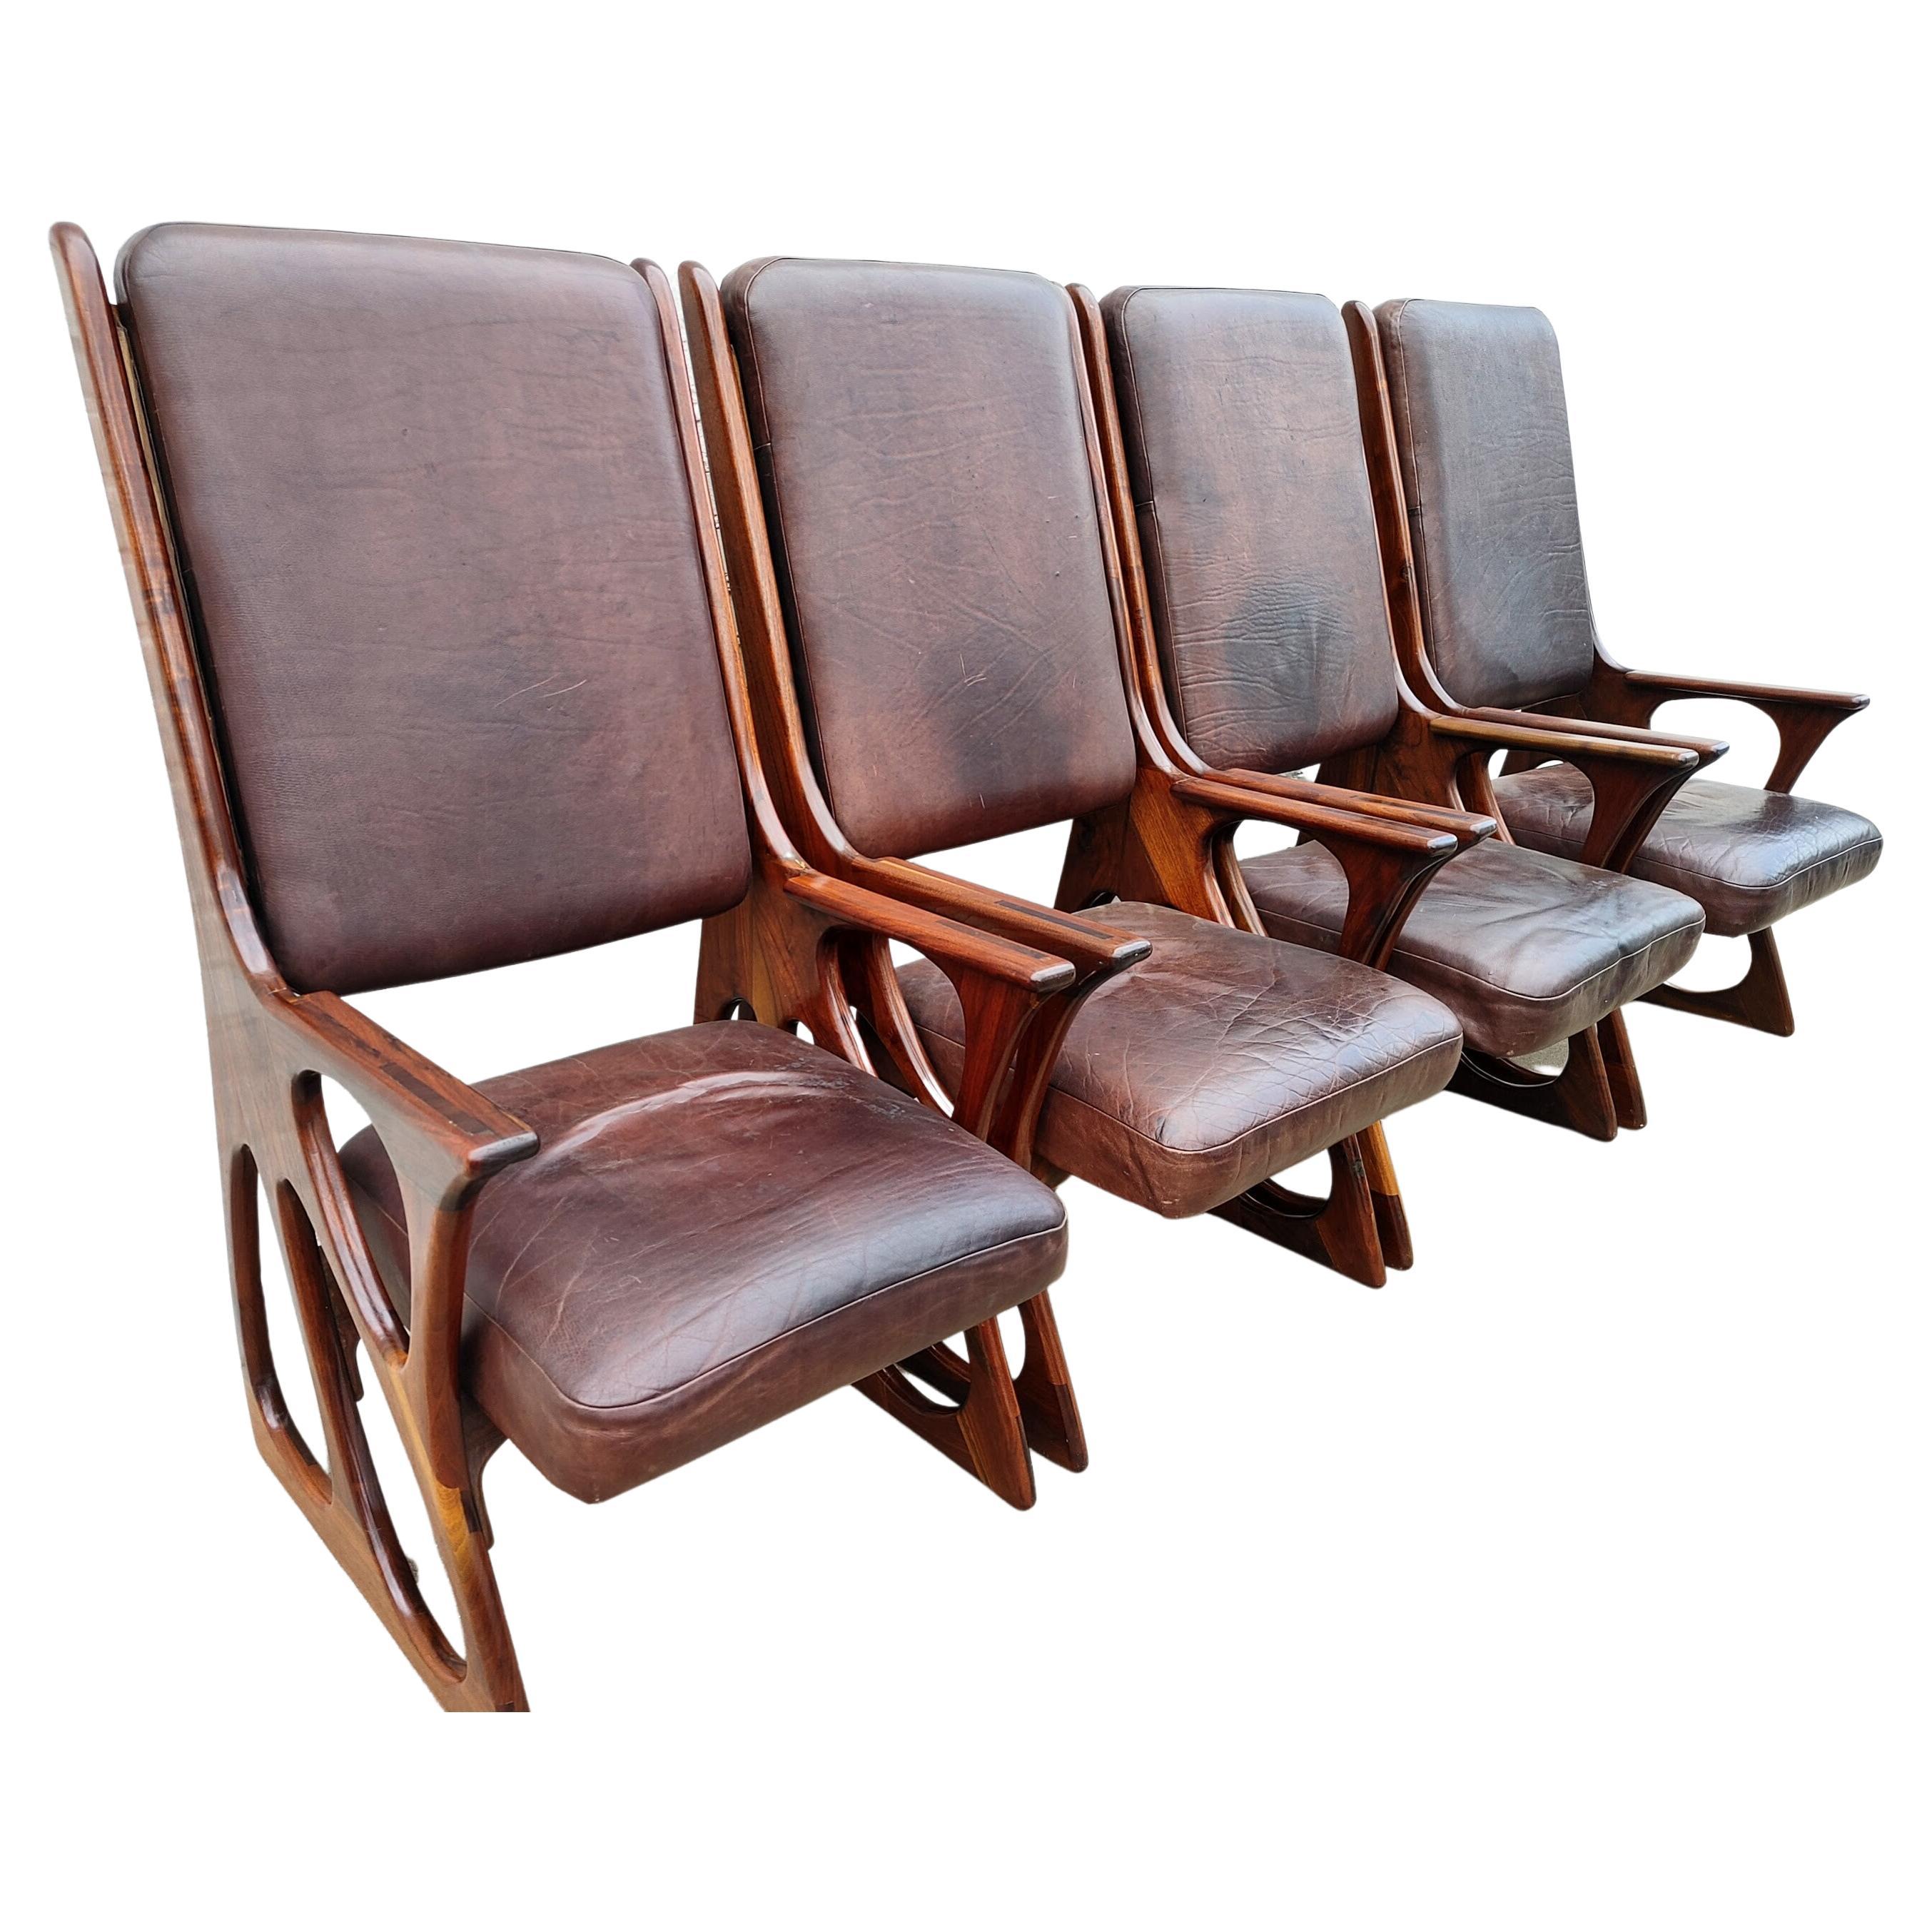 American Studio Craft Wendell Castle Inspired Chairs For Sale